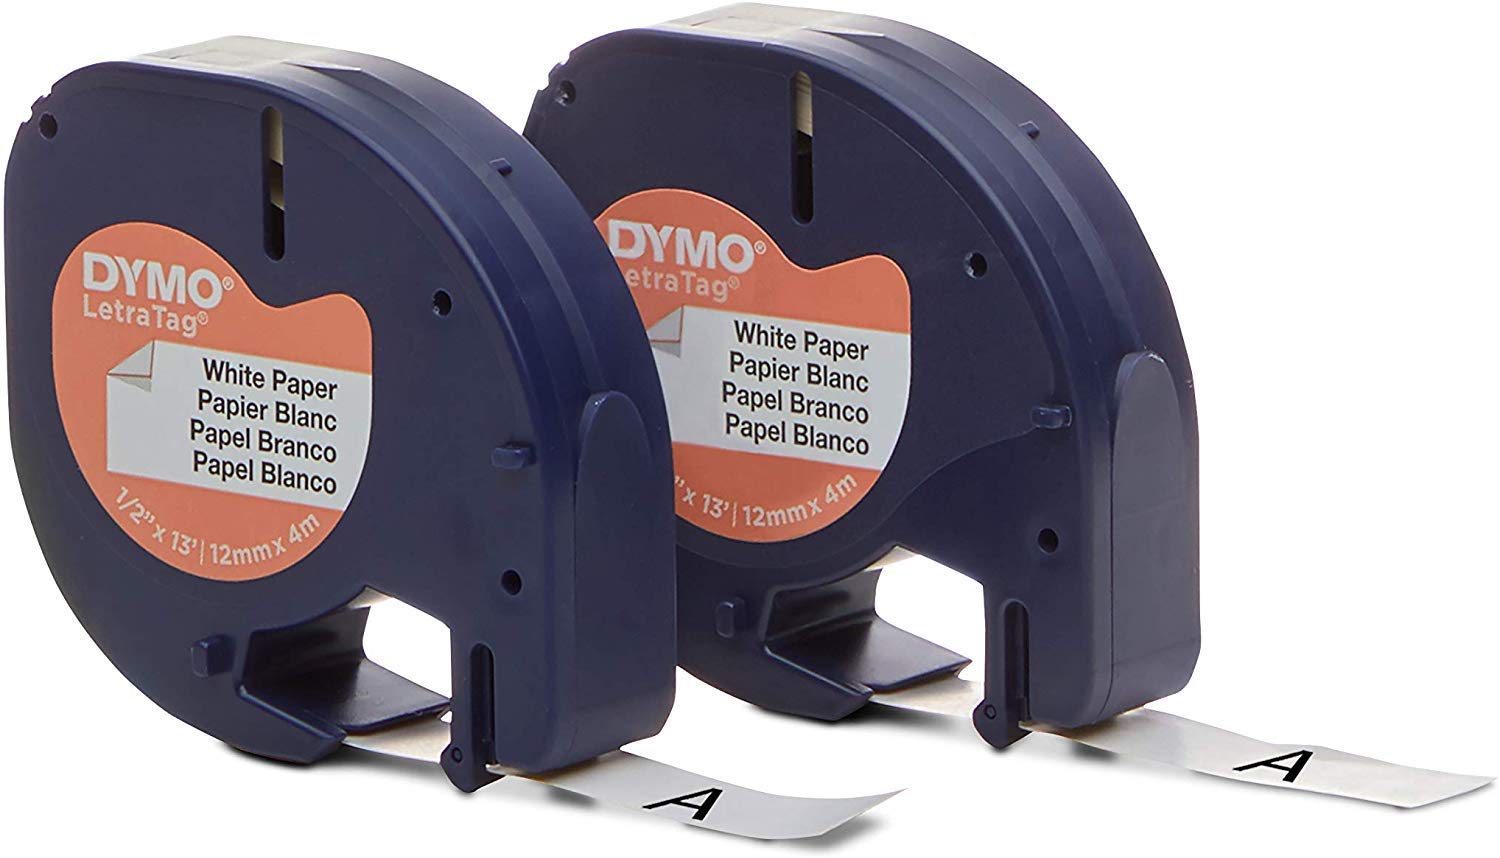 DYMO LT Paper Labels for LetraTag Label Makers, Black Print on White Labels, 1/2-inch x 13-Foot Roll - image 3 of 13